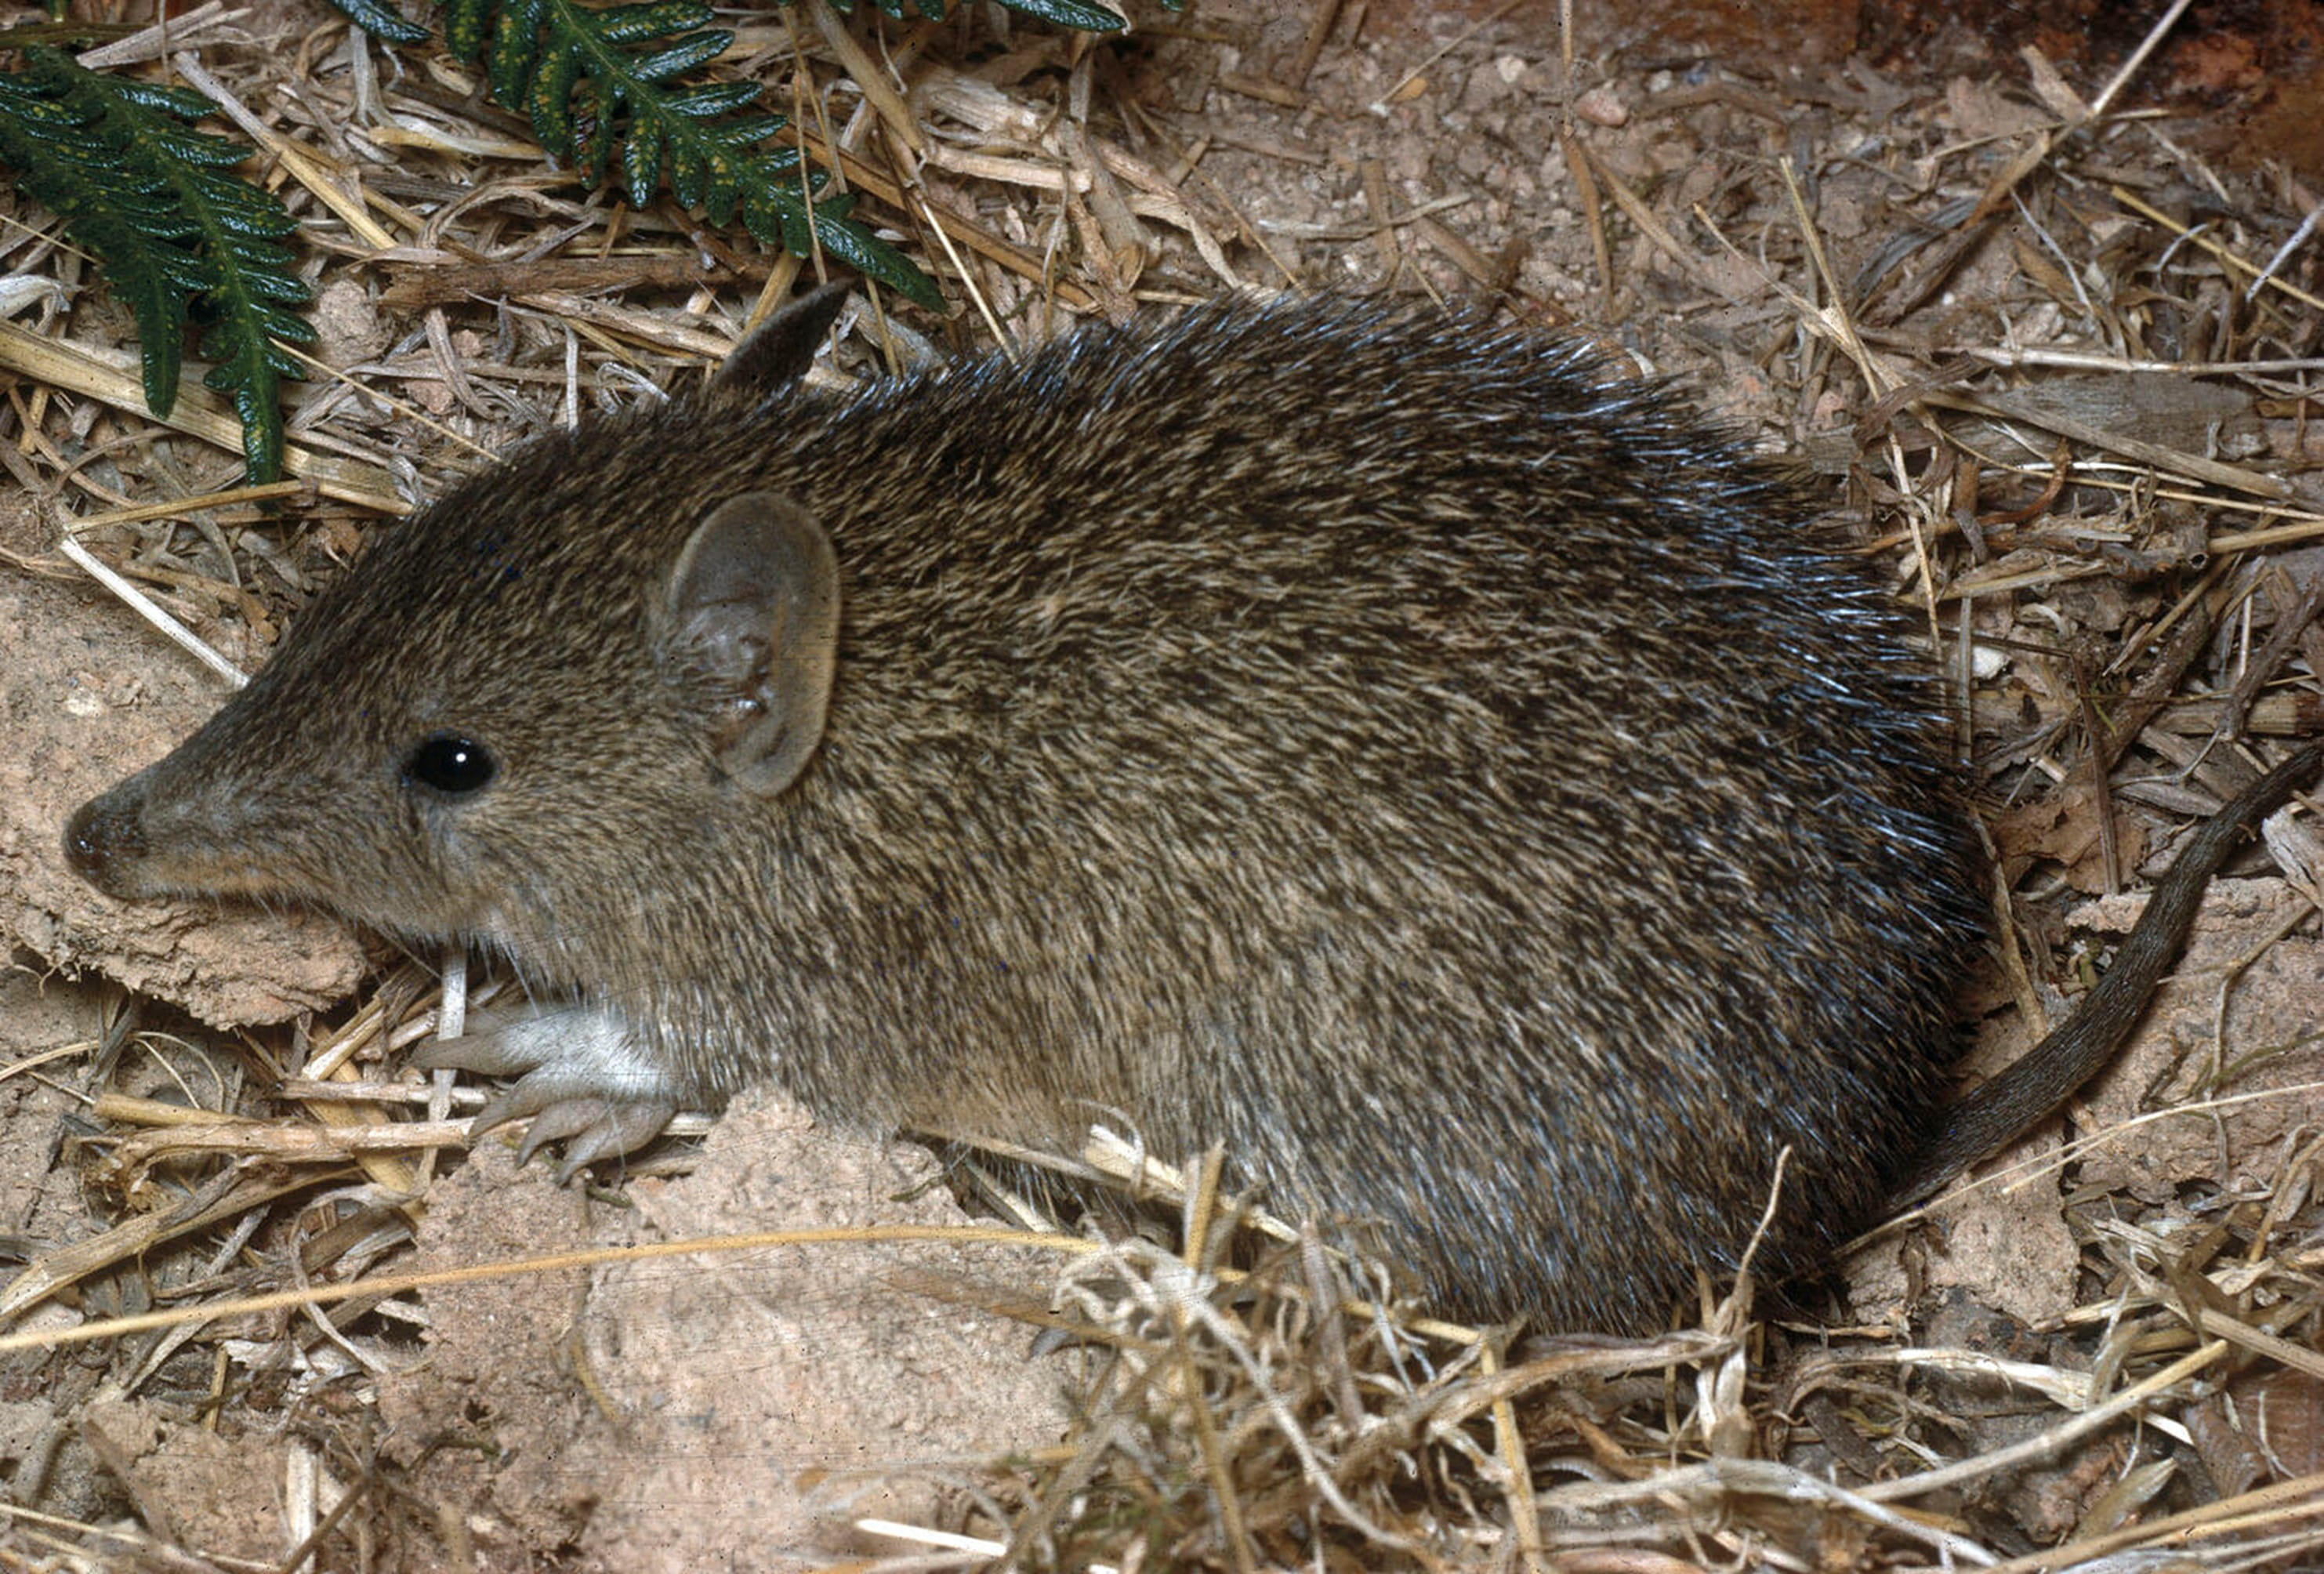 A Southern brown bandicoot is on the ground sniffing in the undergrowth.